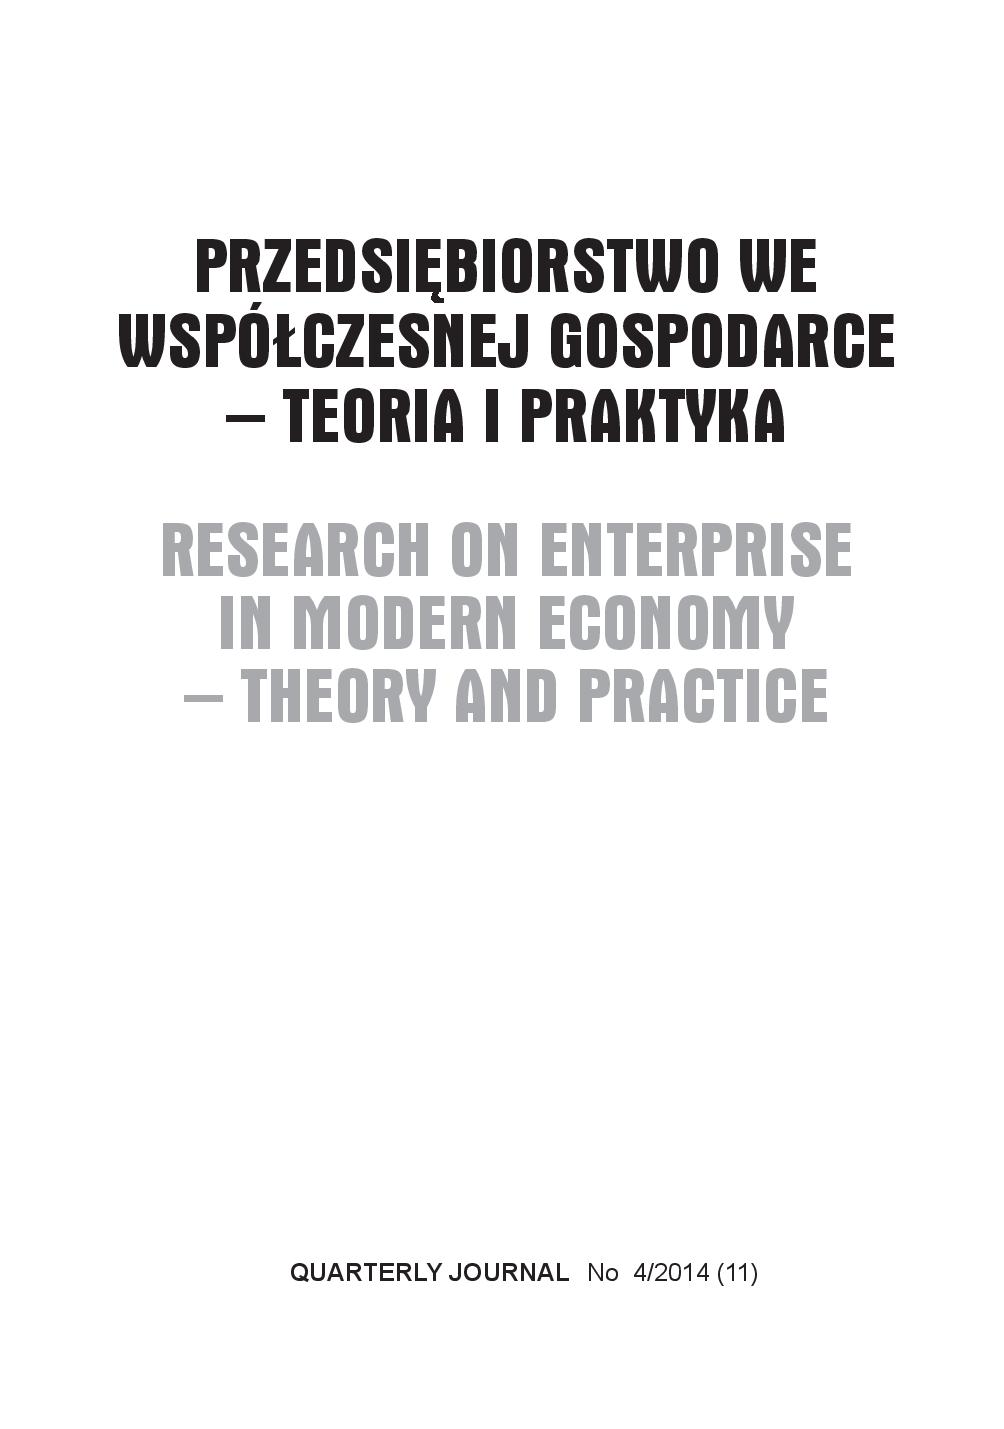 Value creation in e-business as a driver of financial performance: investigating business models of Polish internet companies Cover Image